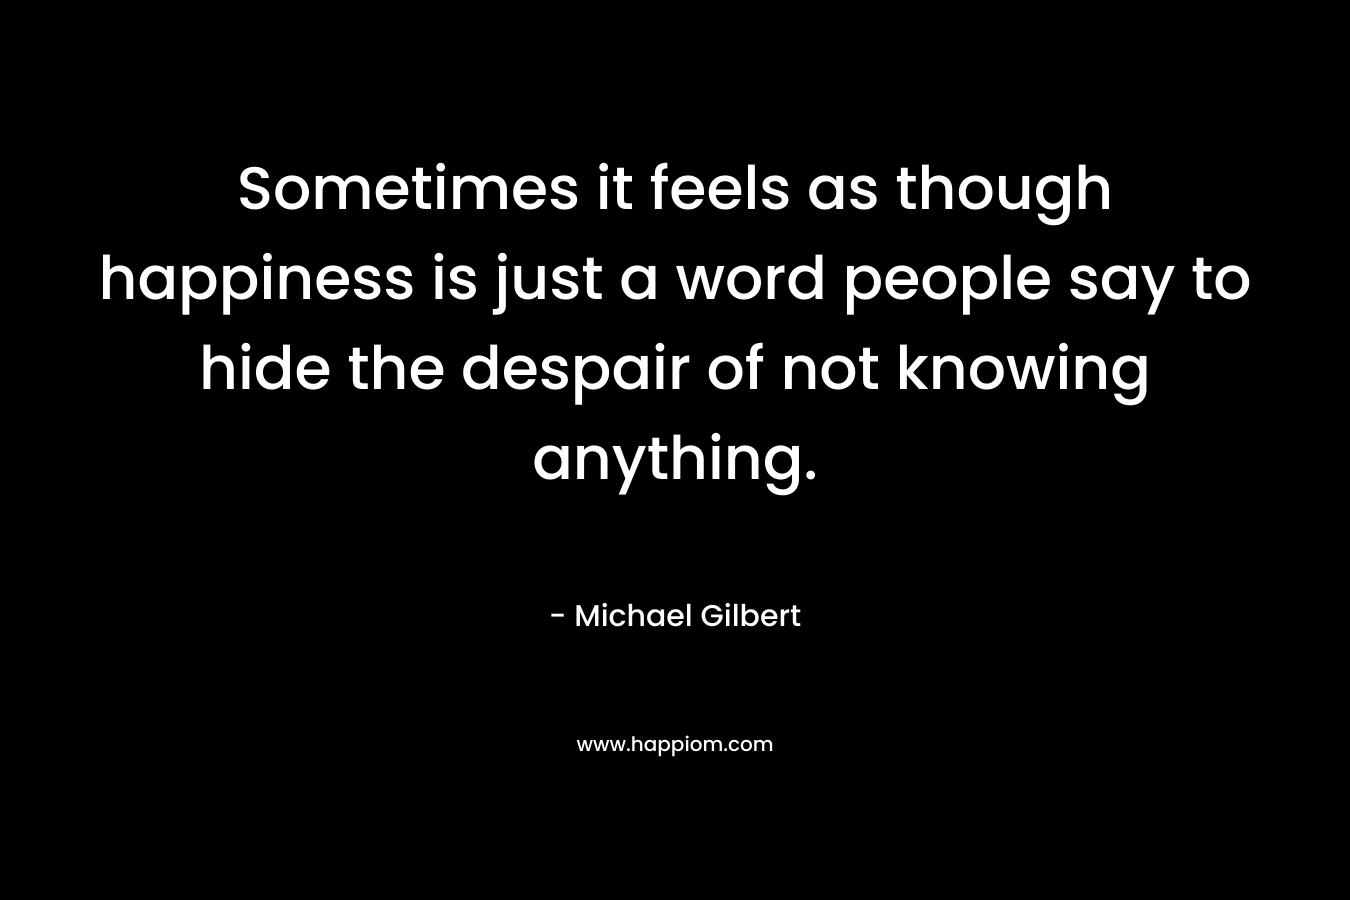 Sometimes it feels as though happiness is just a word people say to hide the despair of not knowing anything.